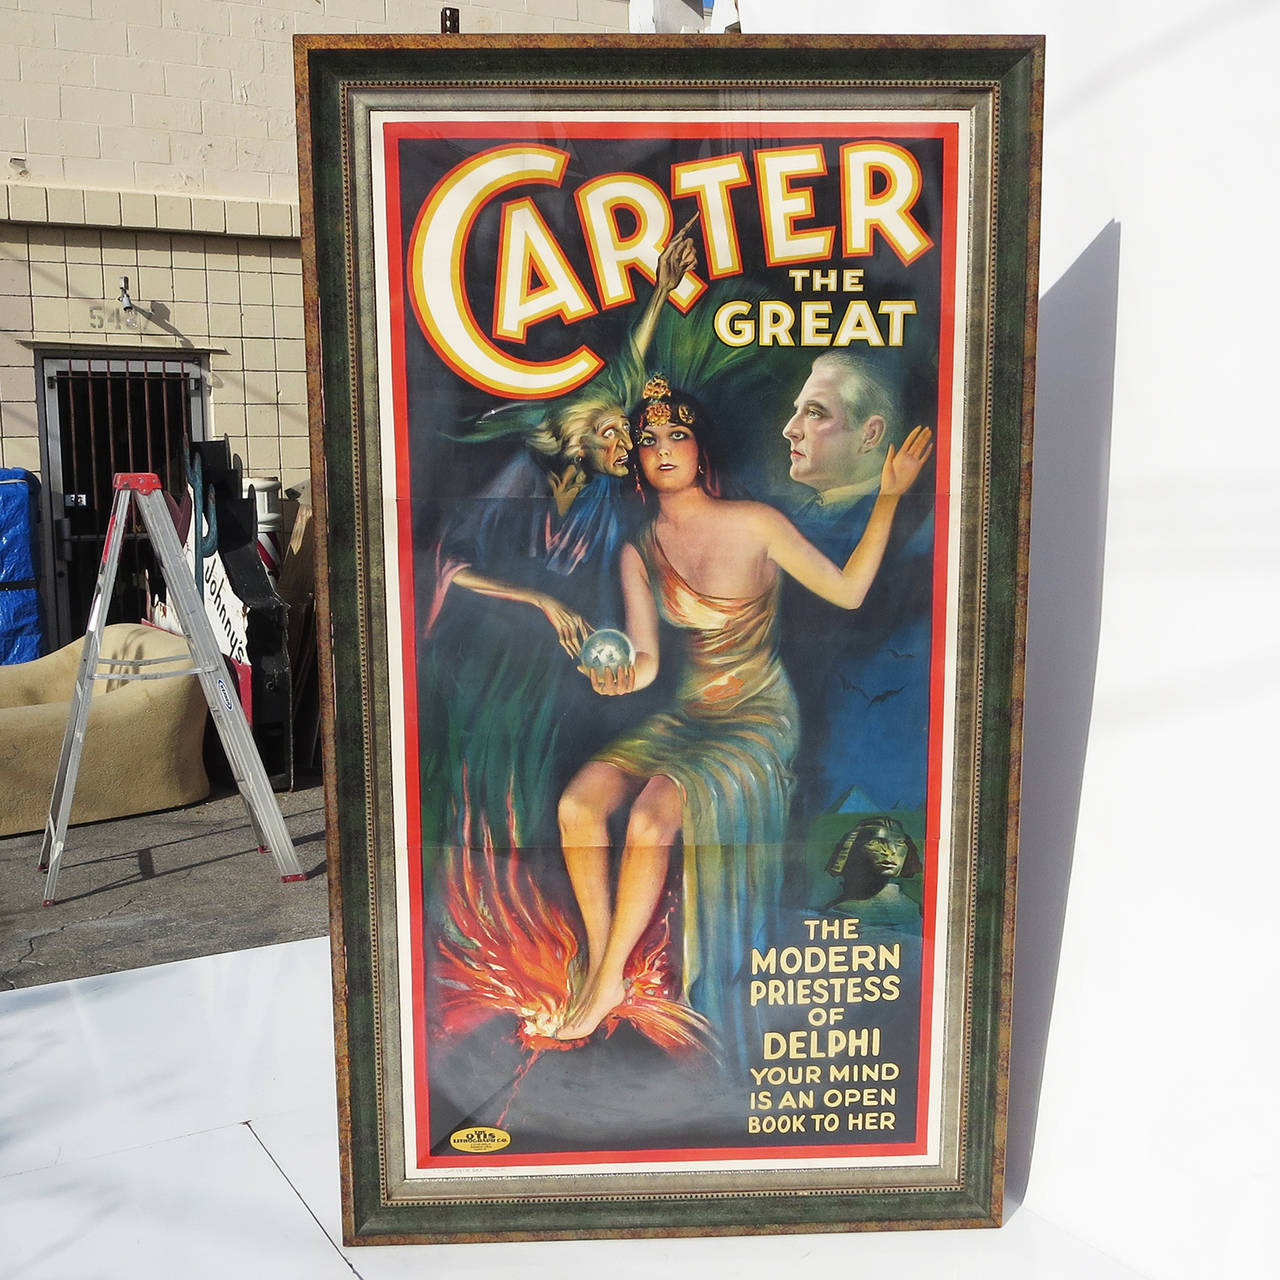 Carter the Great is most likely the second best known American magician in early 20th century magic circles. Although Houdini had greater fame, nobody had better artwork in posters than Carter the Great. He retired young in 1918, and his posters